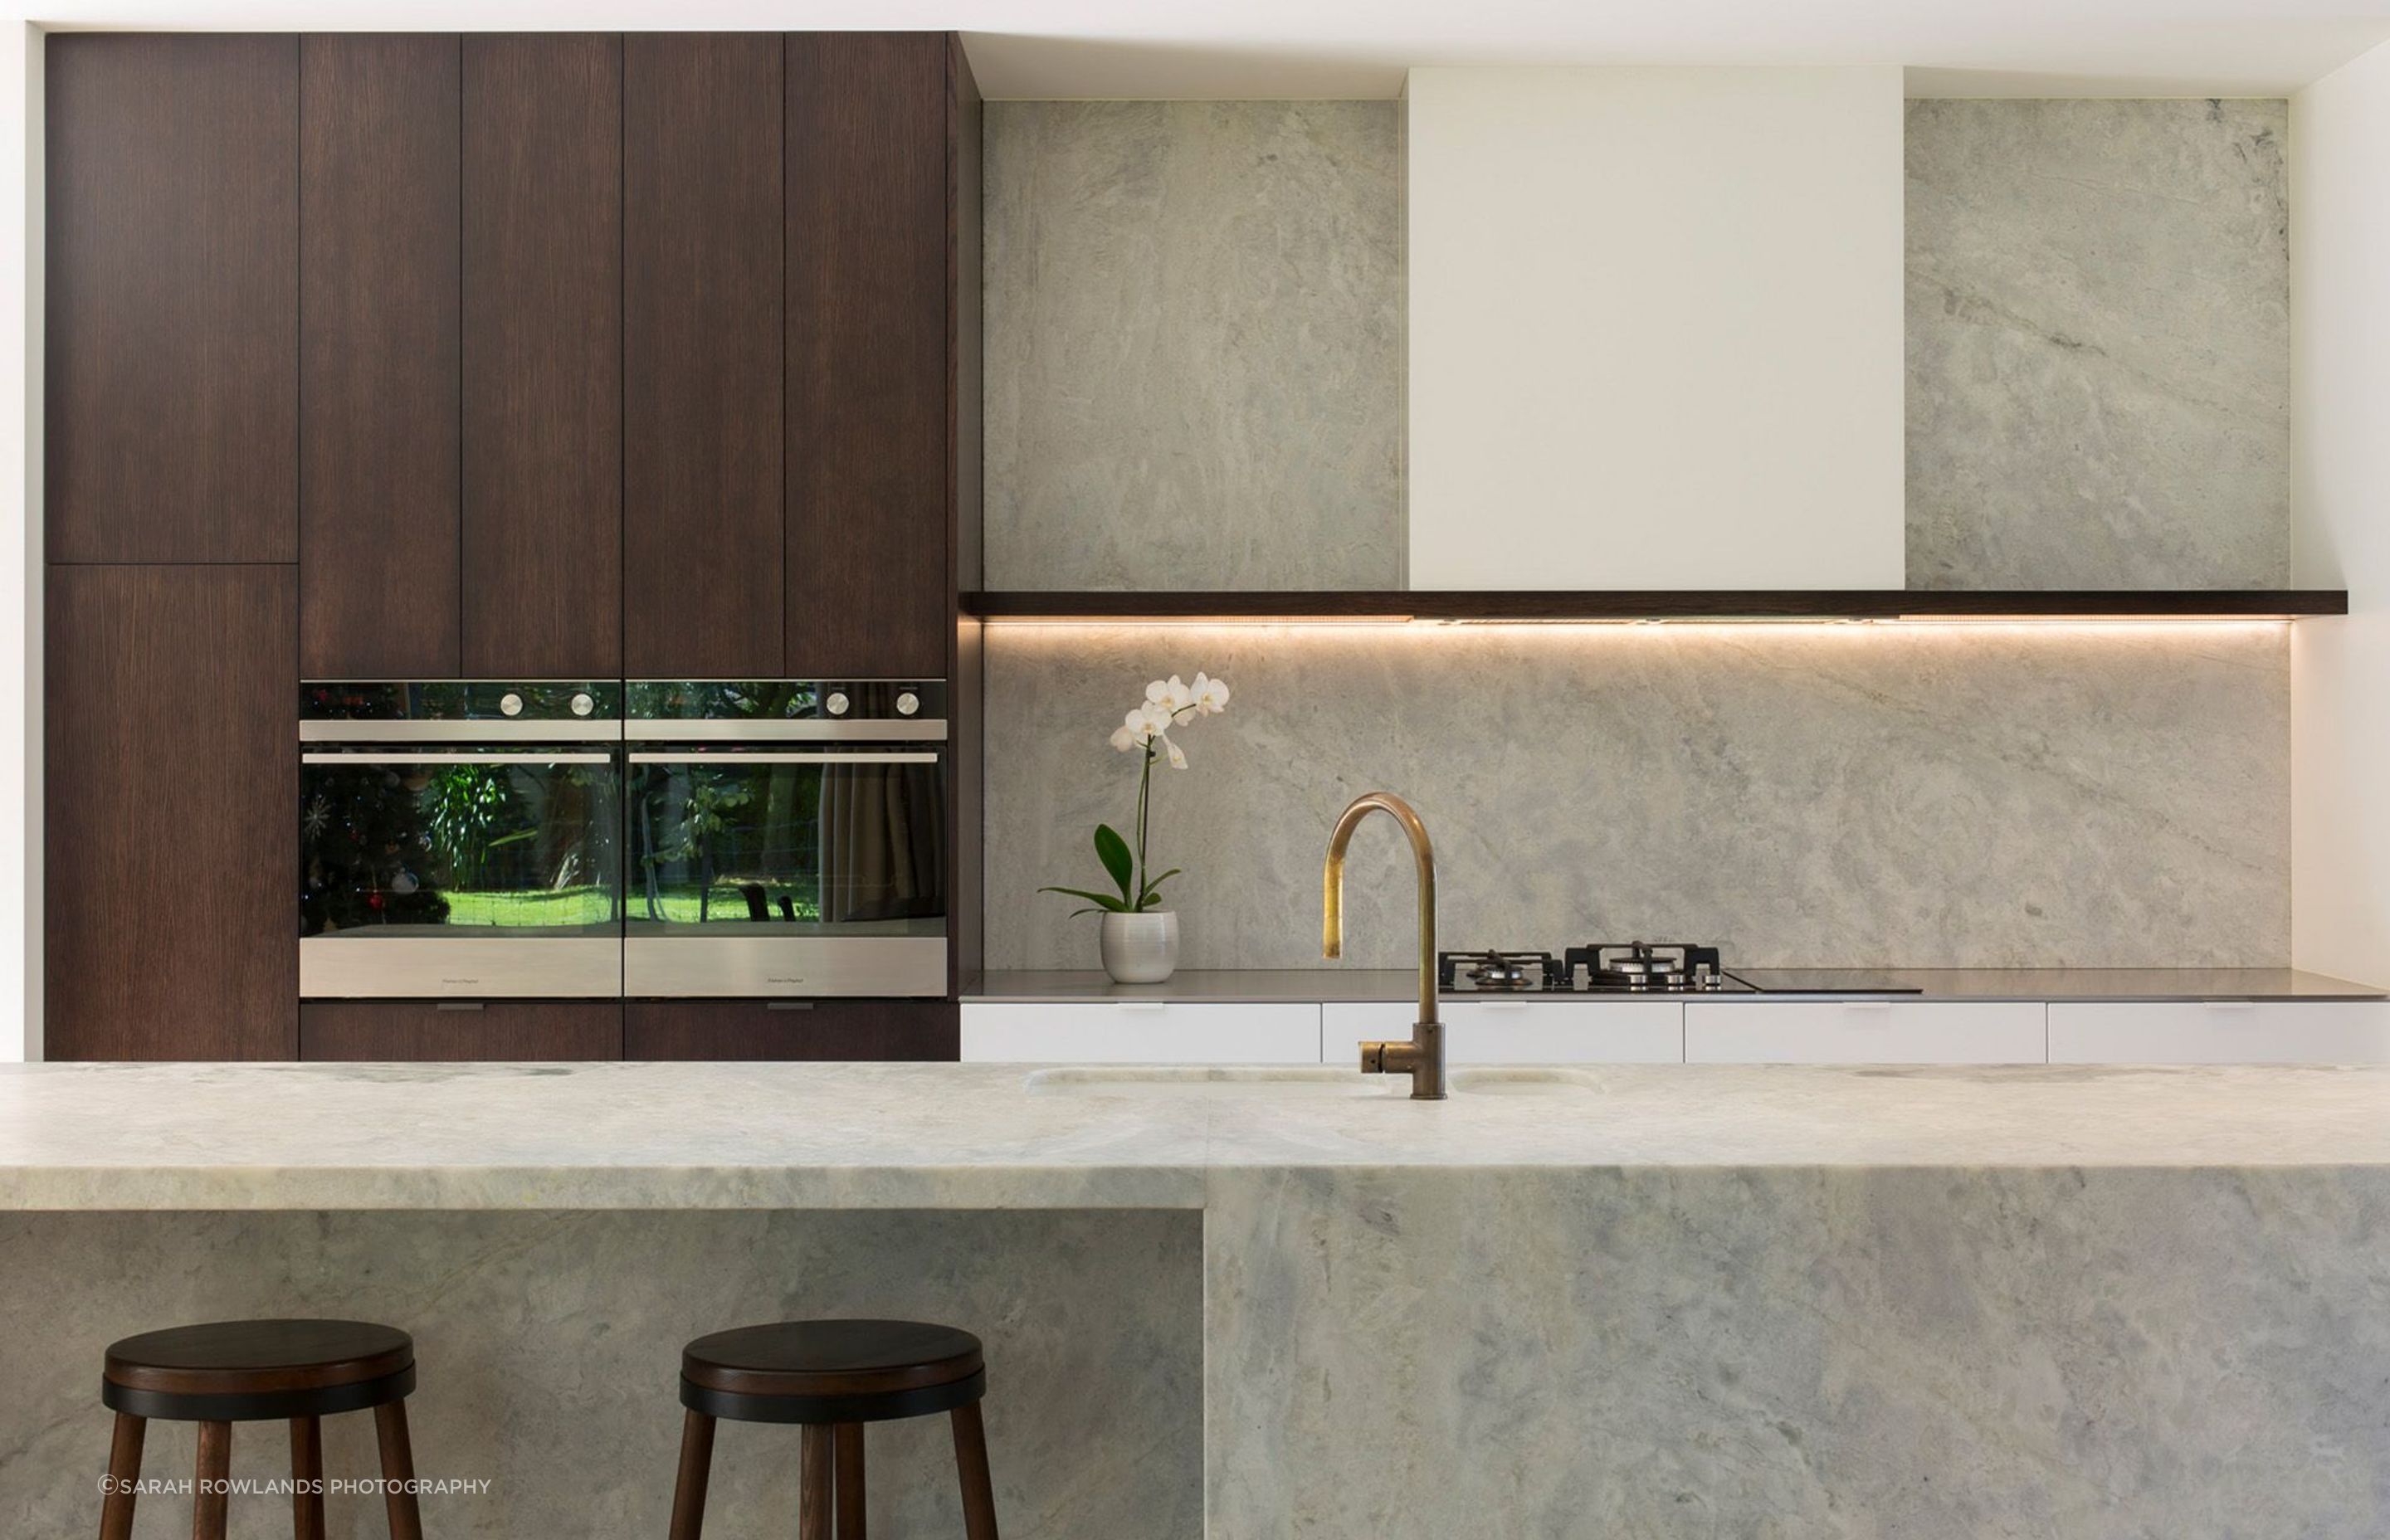 The kitchen features a purpose-built granite island, benchtops and splashback, along with cabinetry in dark-stained timber veneer, brass tapware and oak flooring.